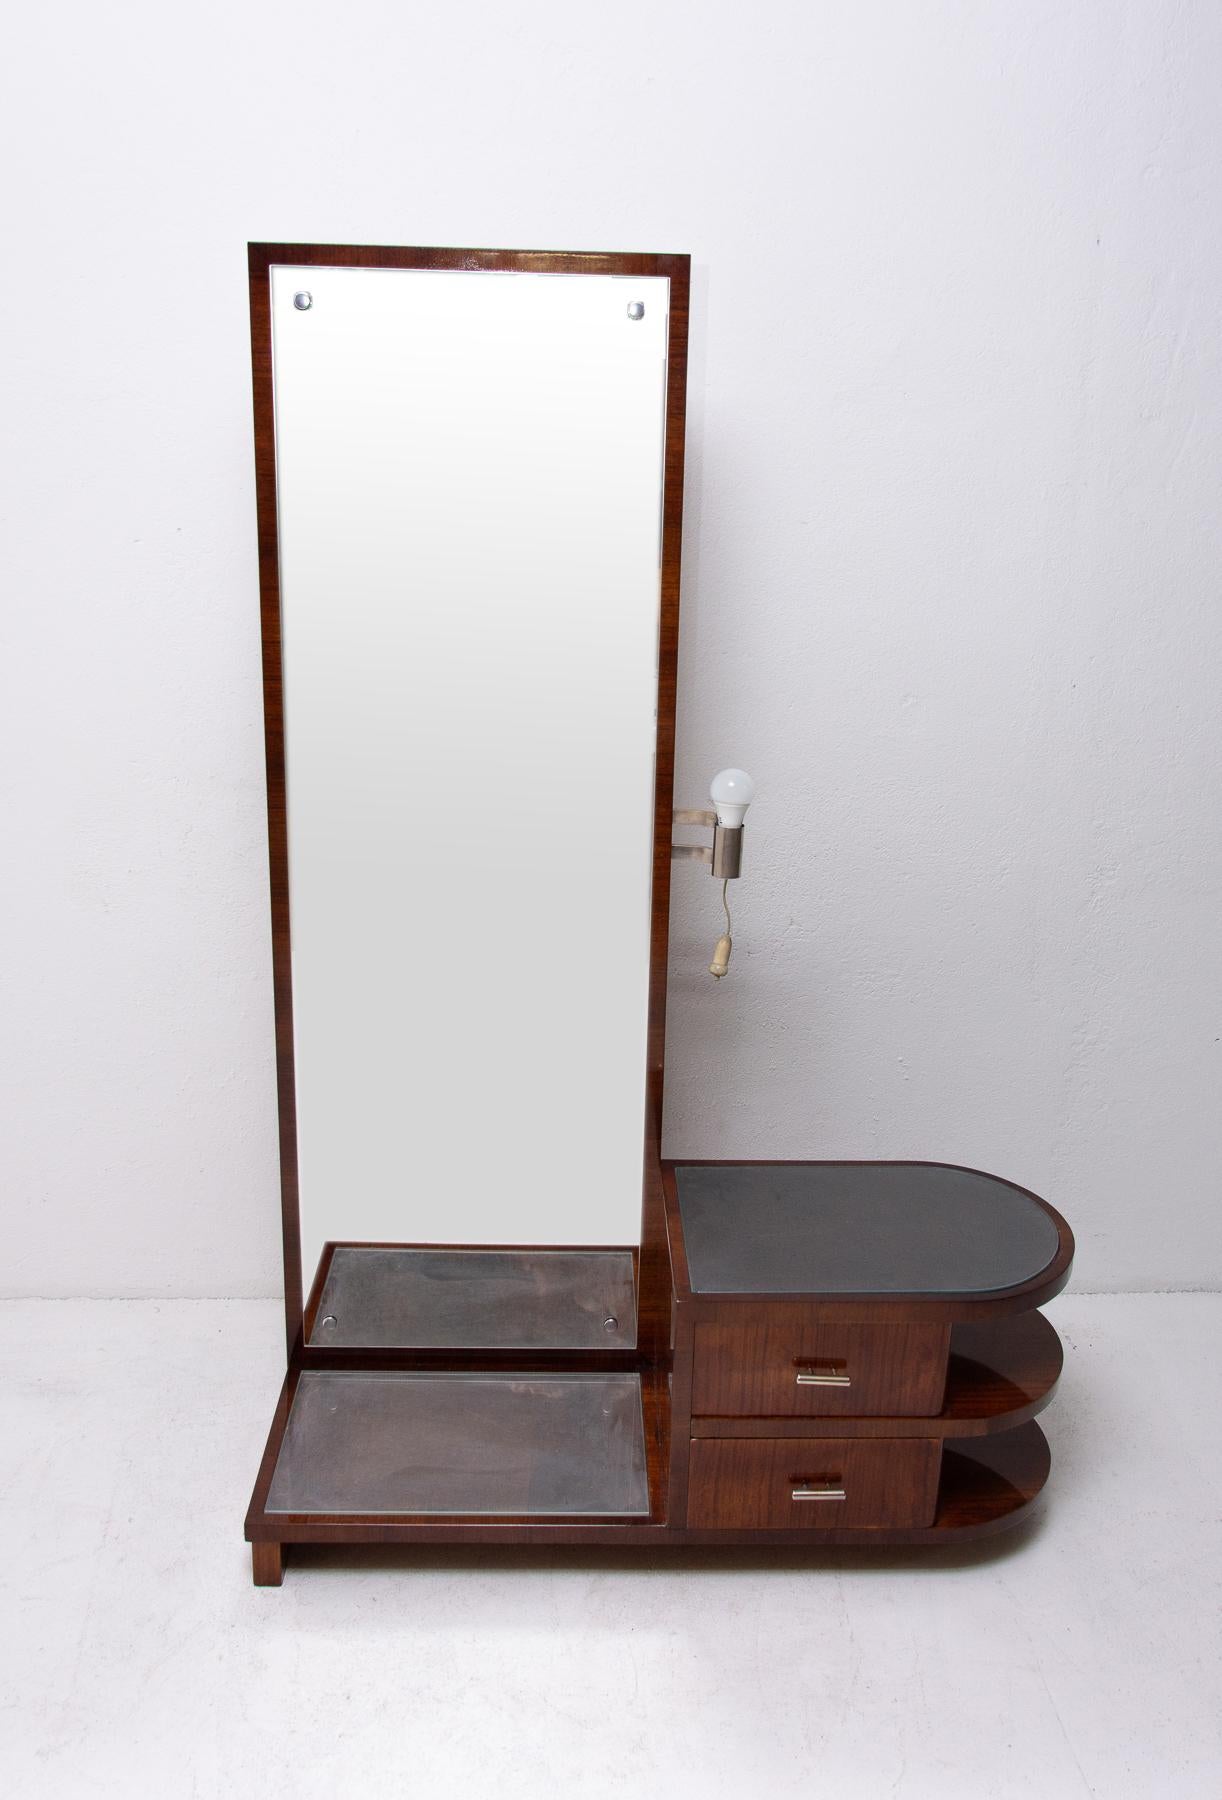 Functionalist vanity/dressing table-mirror with a drawers for toiletries. It was designed by Czech pre-war architect Vlastimil Brožek and it´s made of wood with walnut veneer. The mirror is equipped with a storage spaces at the bottom, it features a